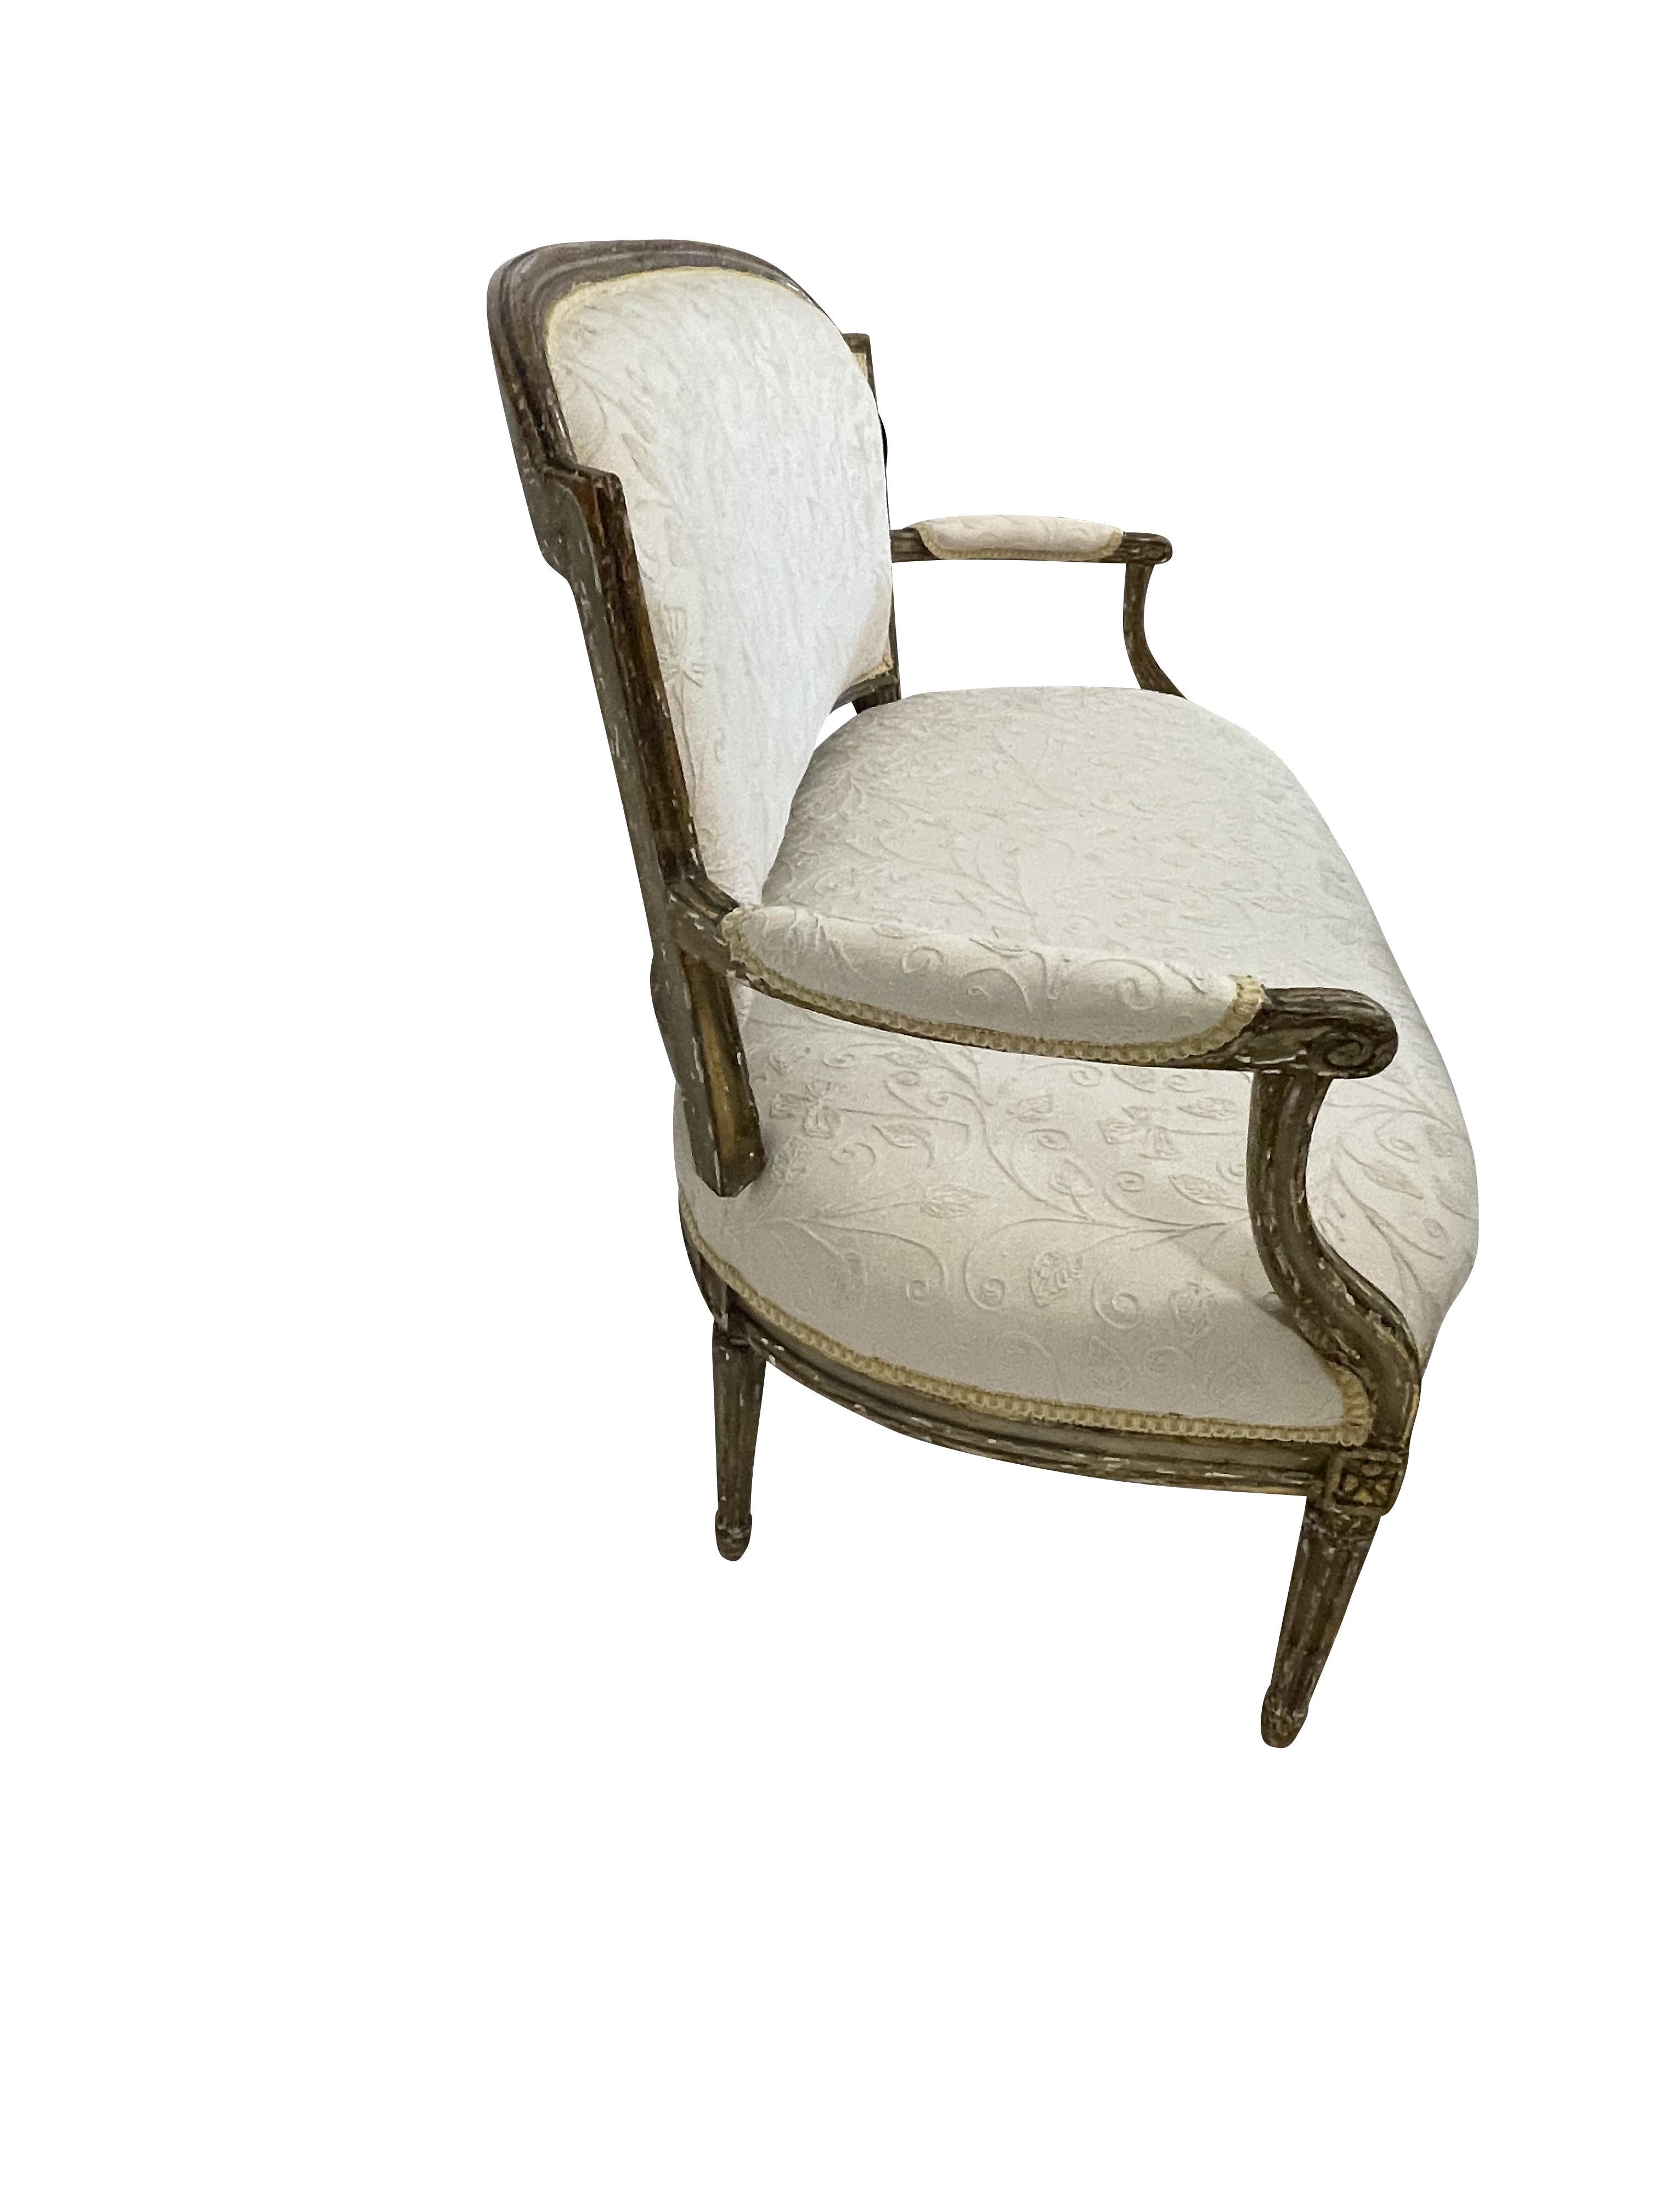 19th Century Louis XVI Style Giltwood Settee  For Sale 2